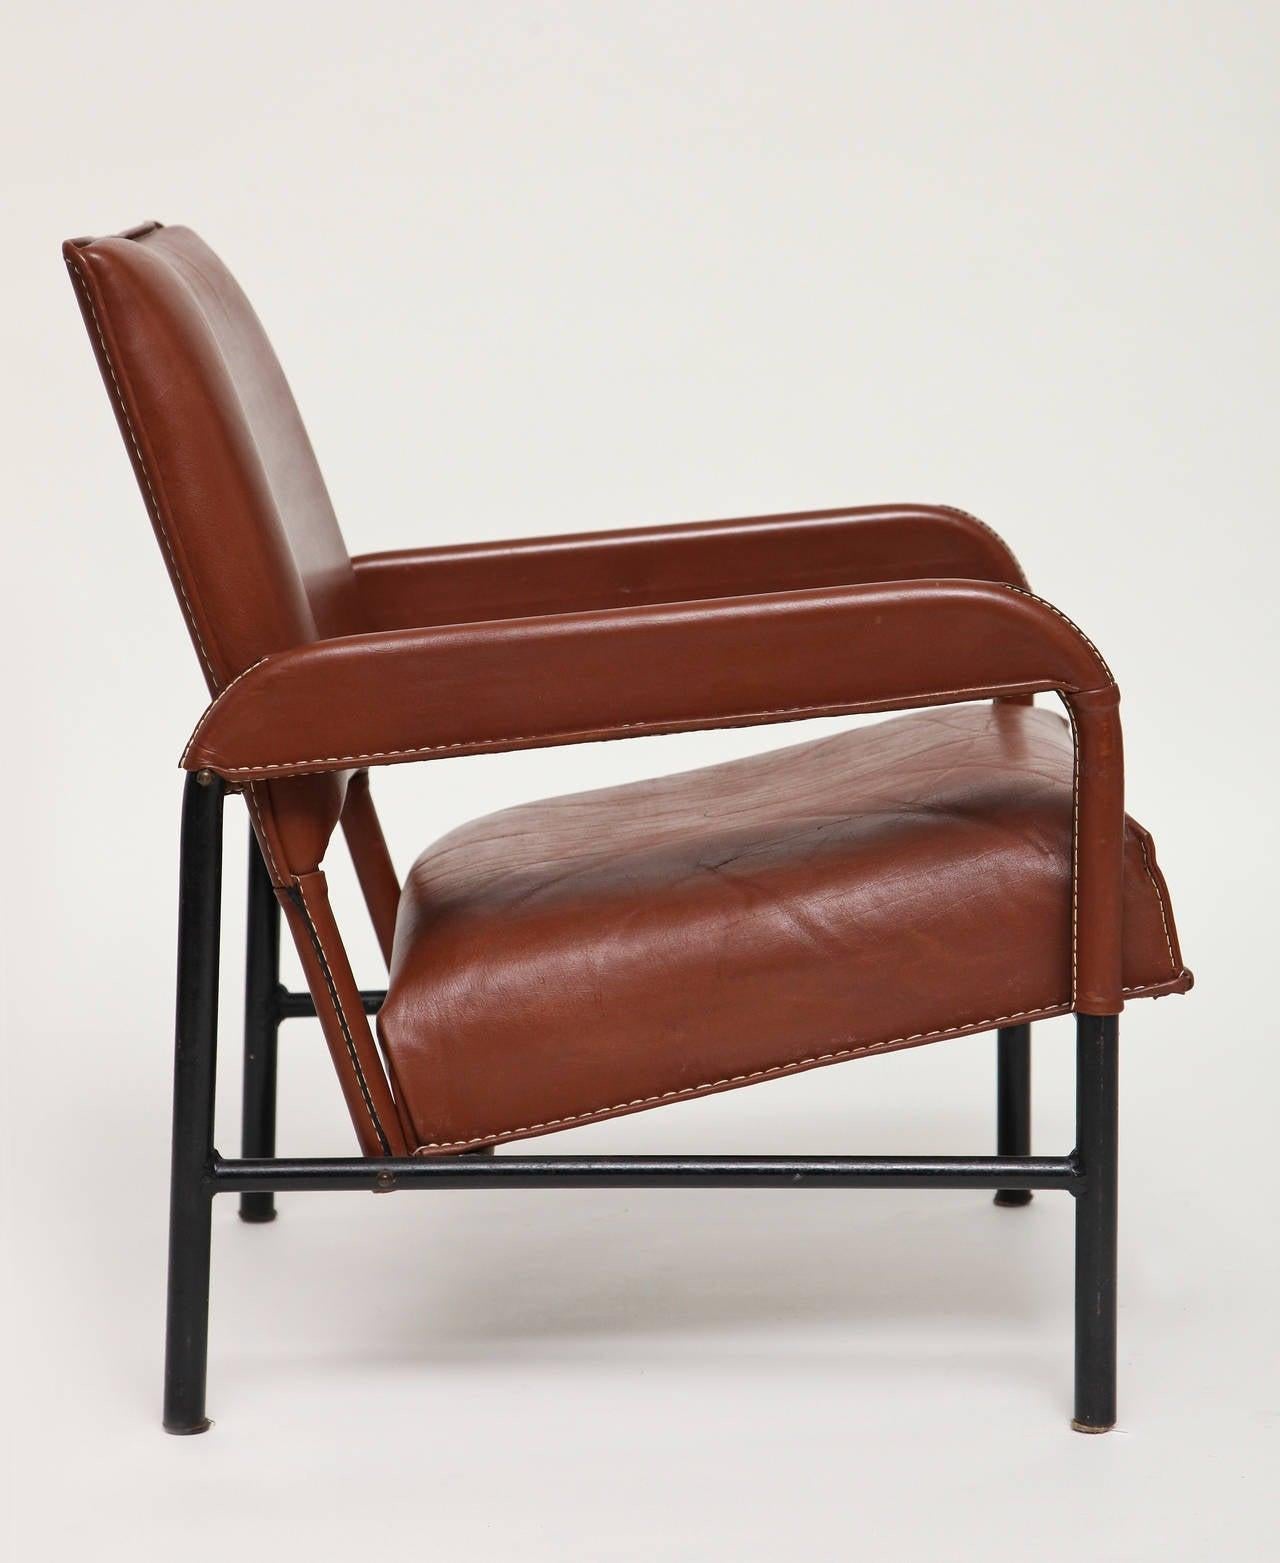 Cast Set of Three Midcentury Leather Armchairs in the manner of Adnet, France, c 1955 For Sale